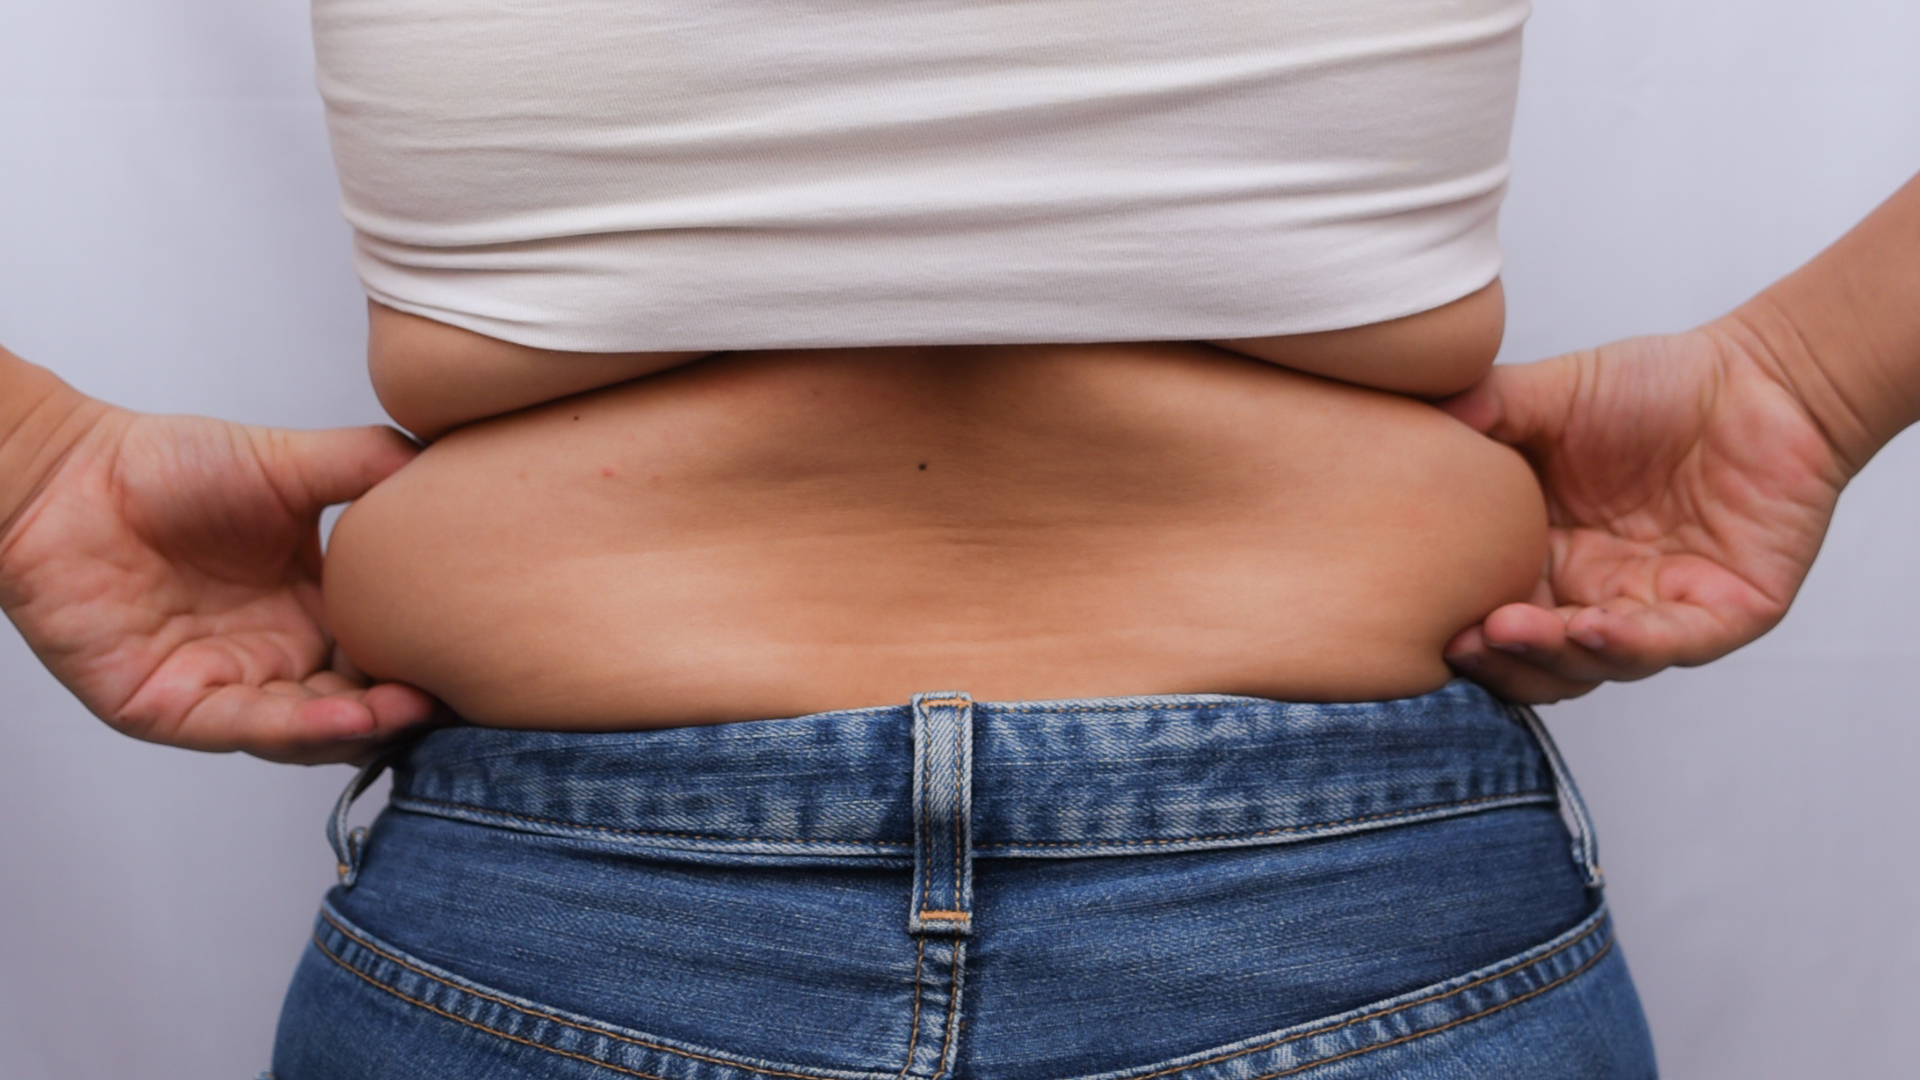 Post-Liposuction - Common Complaints from Web Users